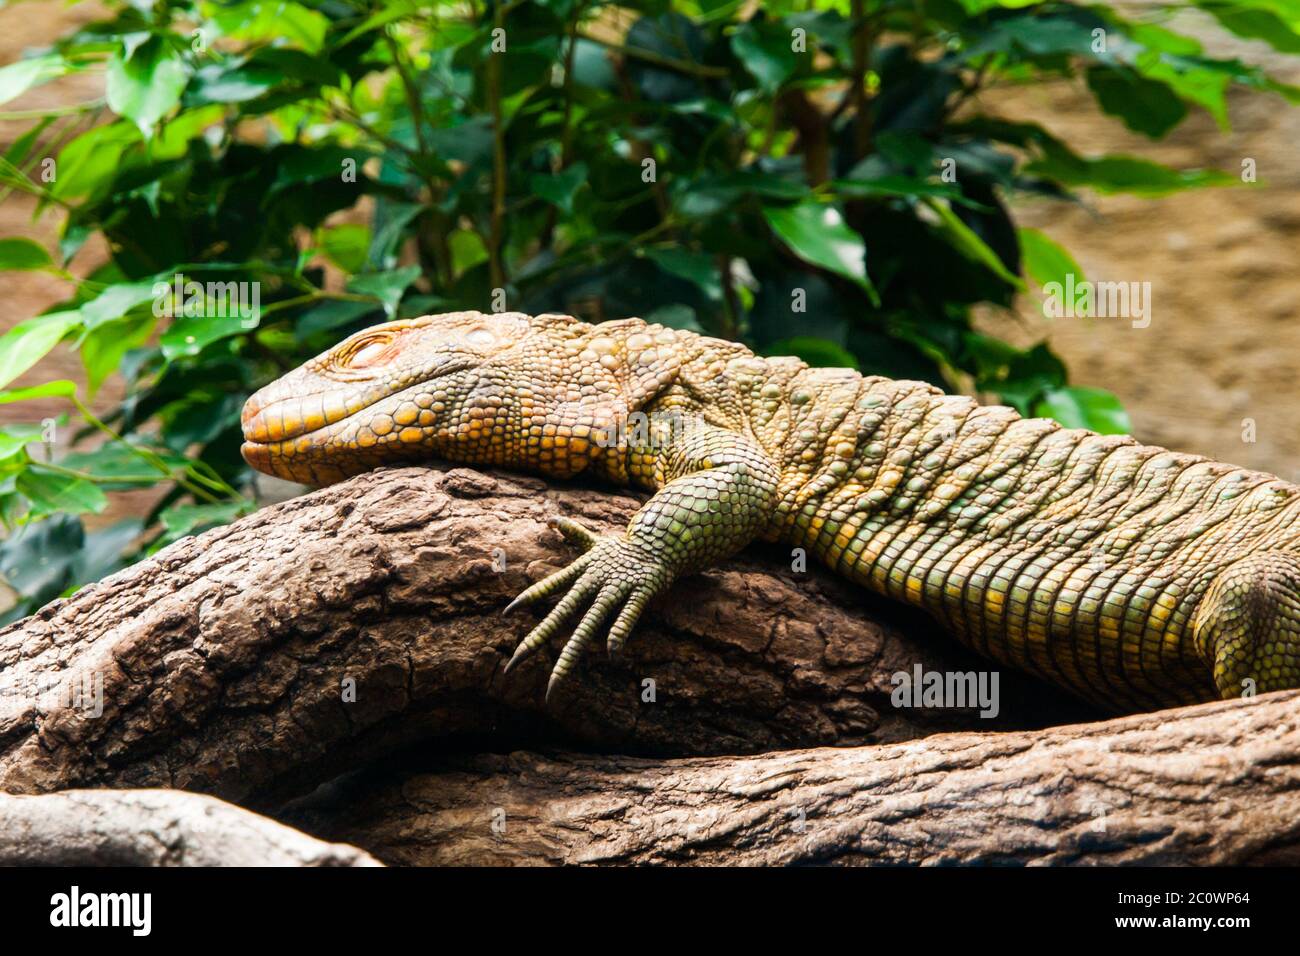 Colorful northern caiman lizard, Dracaena Guianensis, lizard sitting on the tree. Natively found in the jungle of South America. Stock Photo